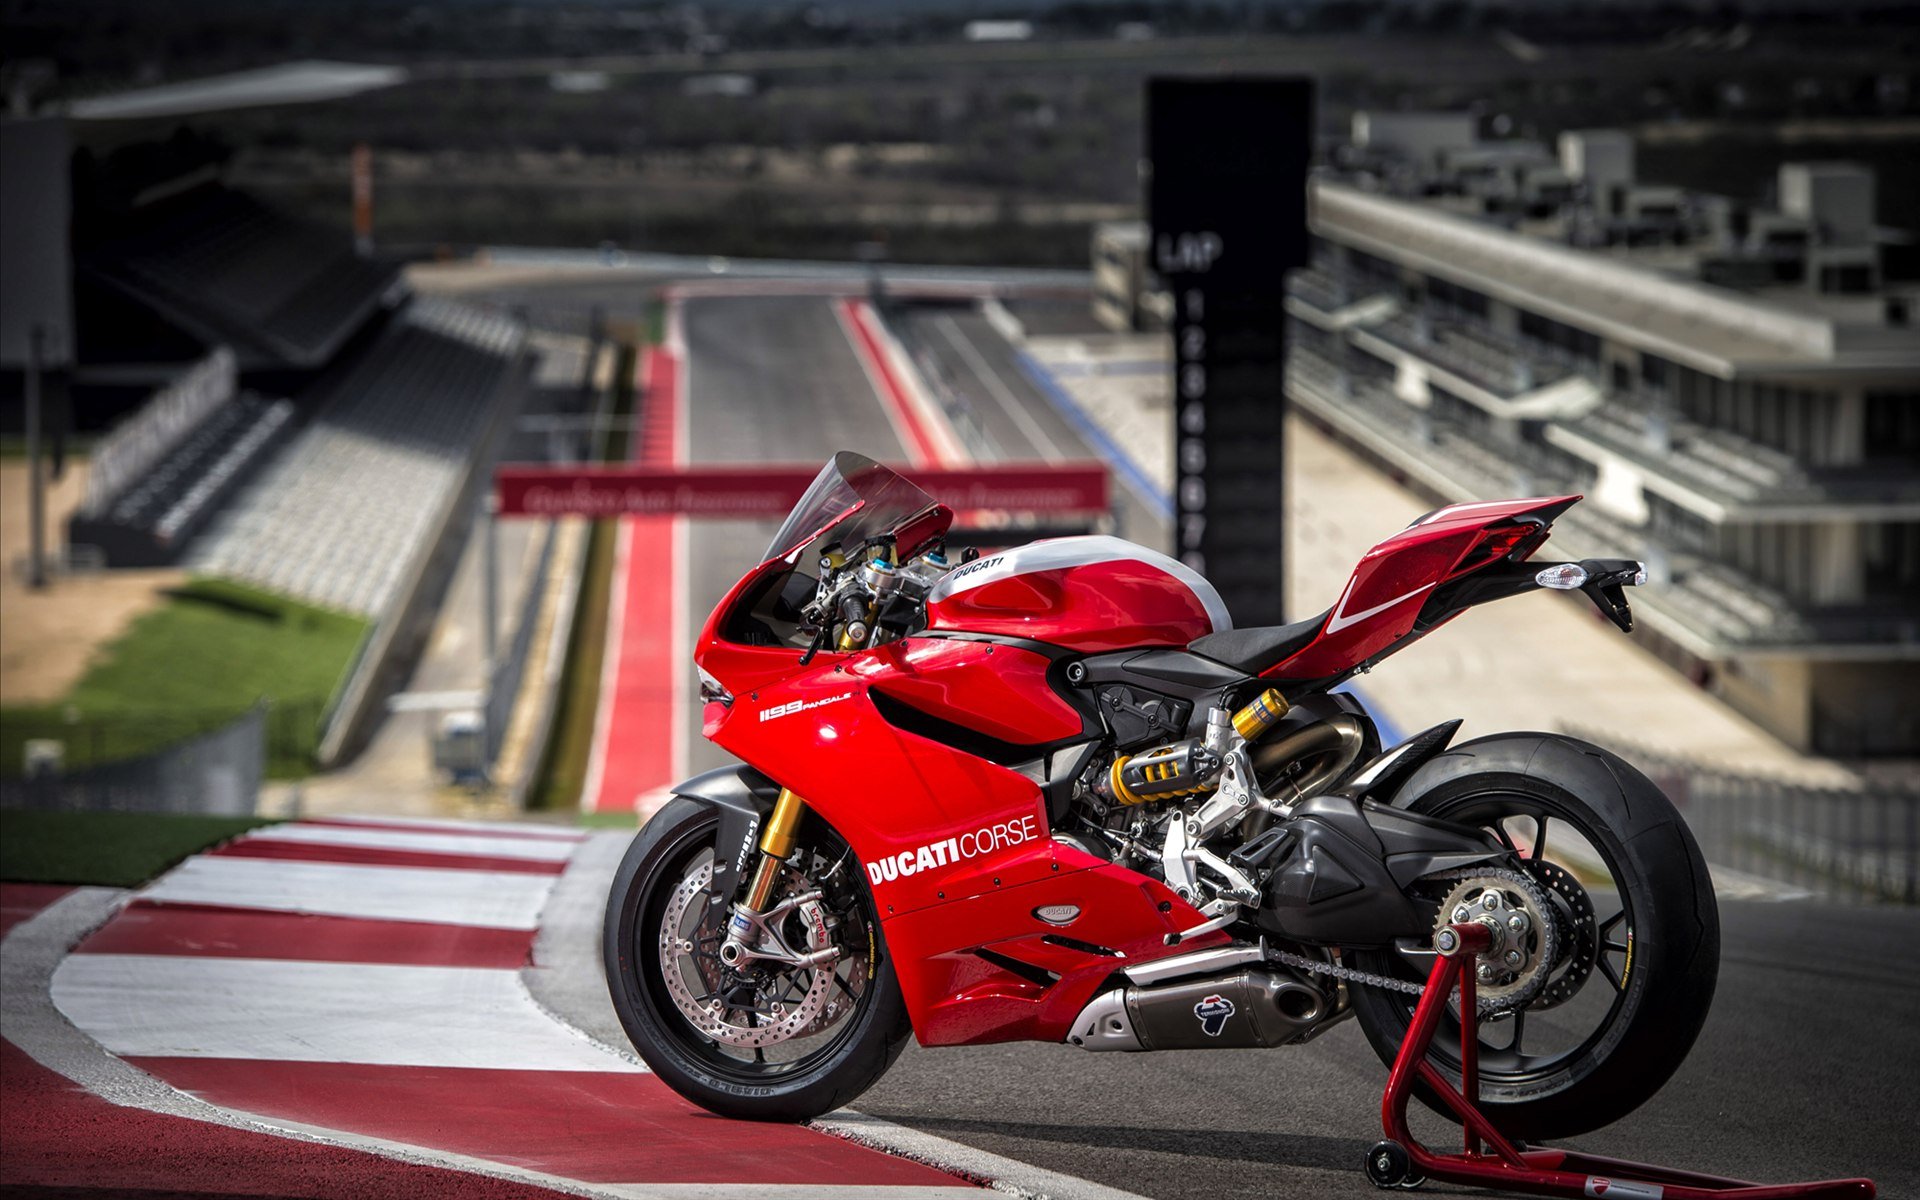 2013 Ducati Superbike 1199 Panigale R Wallpapers HD Wallpapers 1920x1200